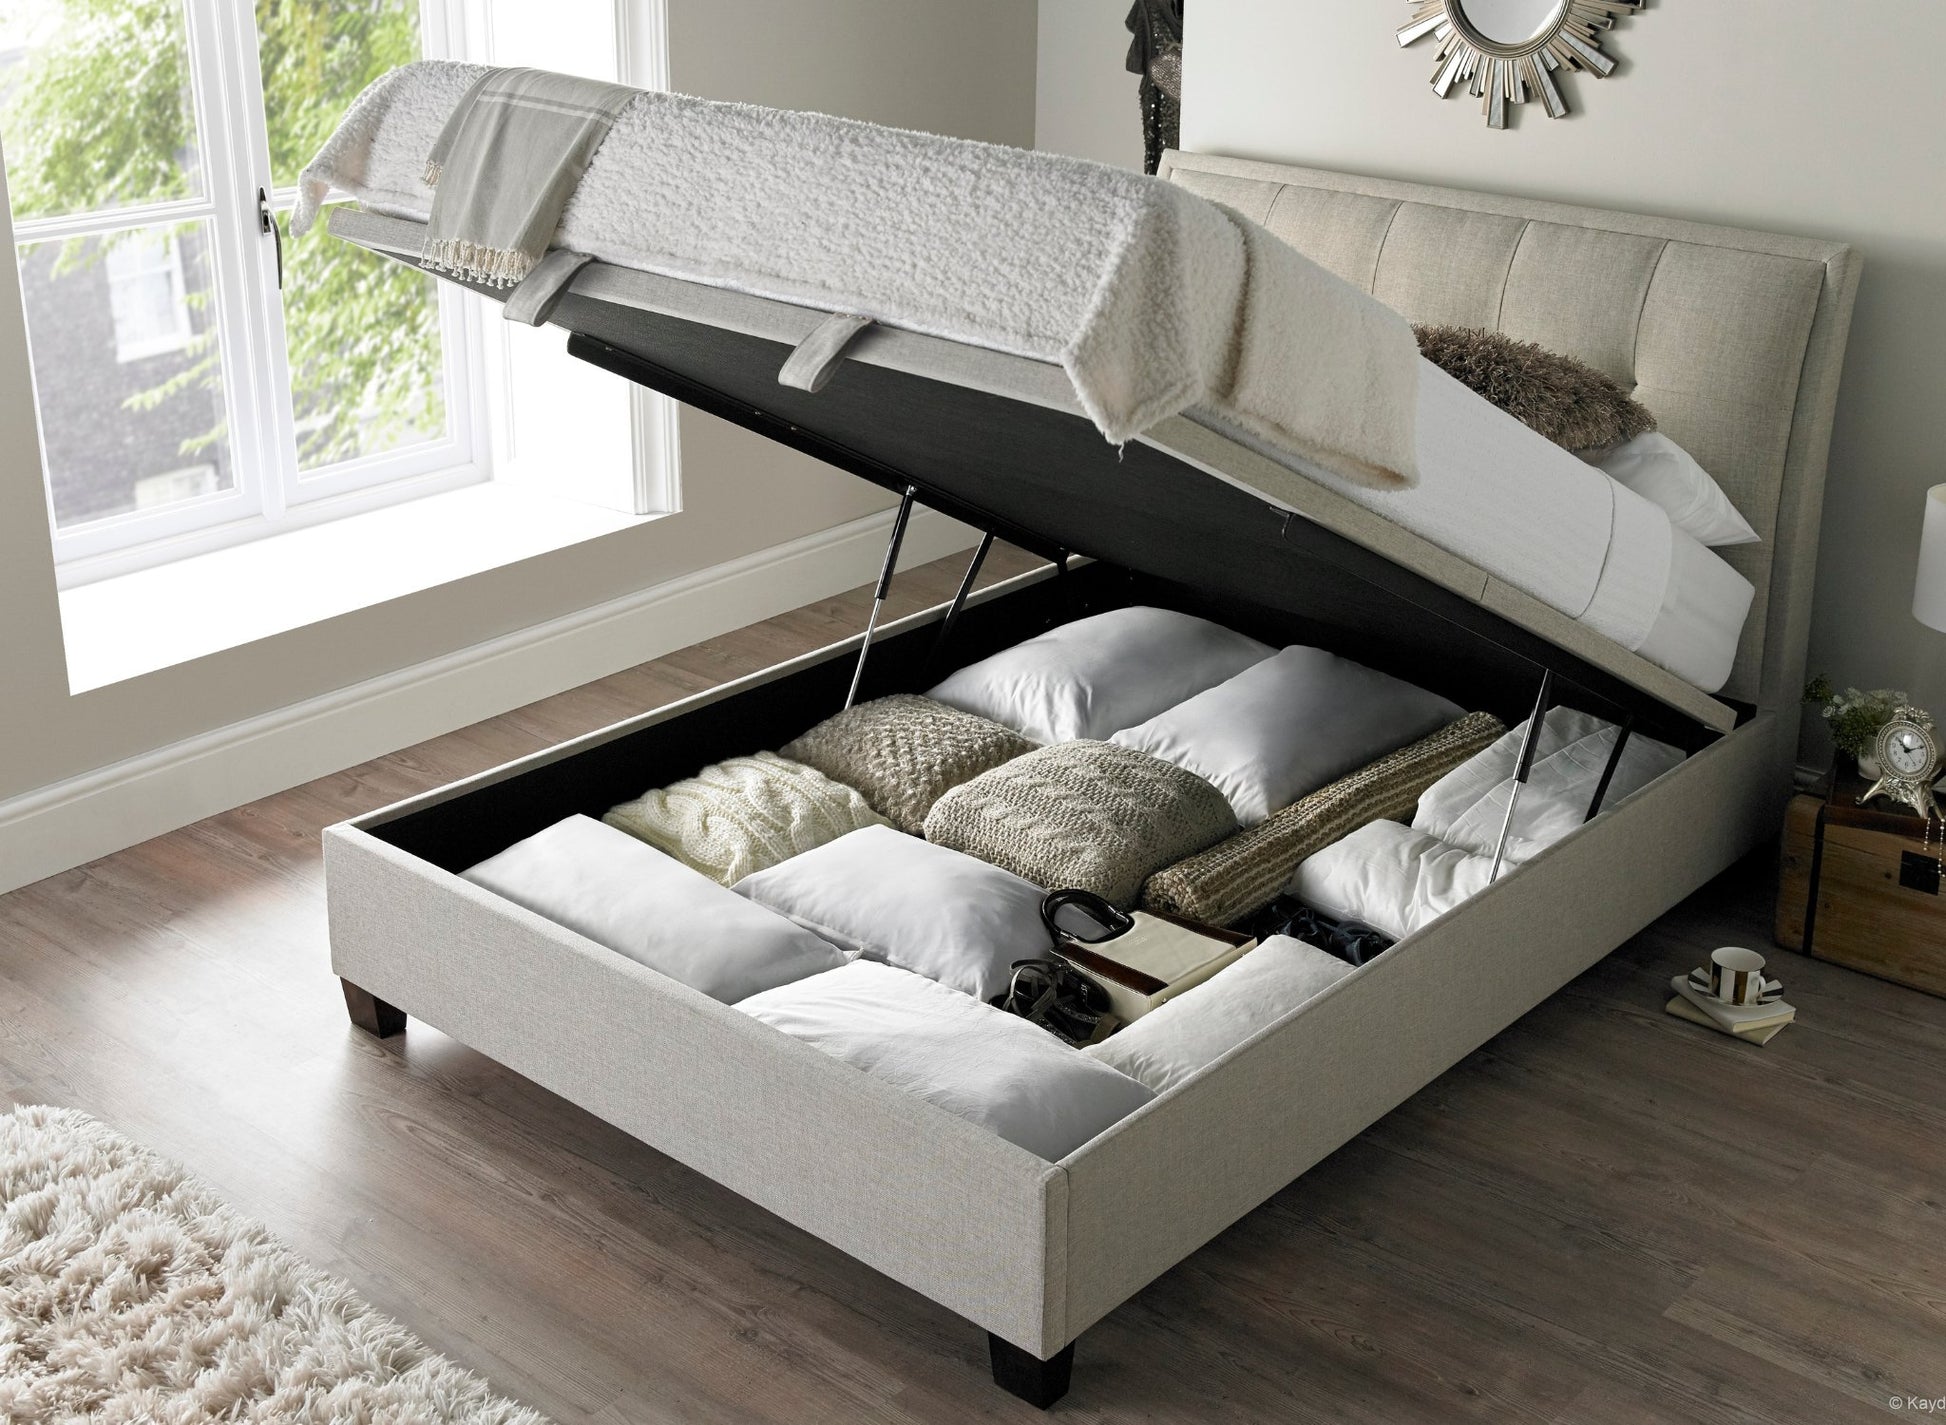 Accent Ottoman Storage Bed Frame by Kaydian Design LTD in ACC135MDG only at TV Beds Northwest